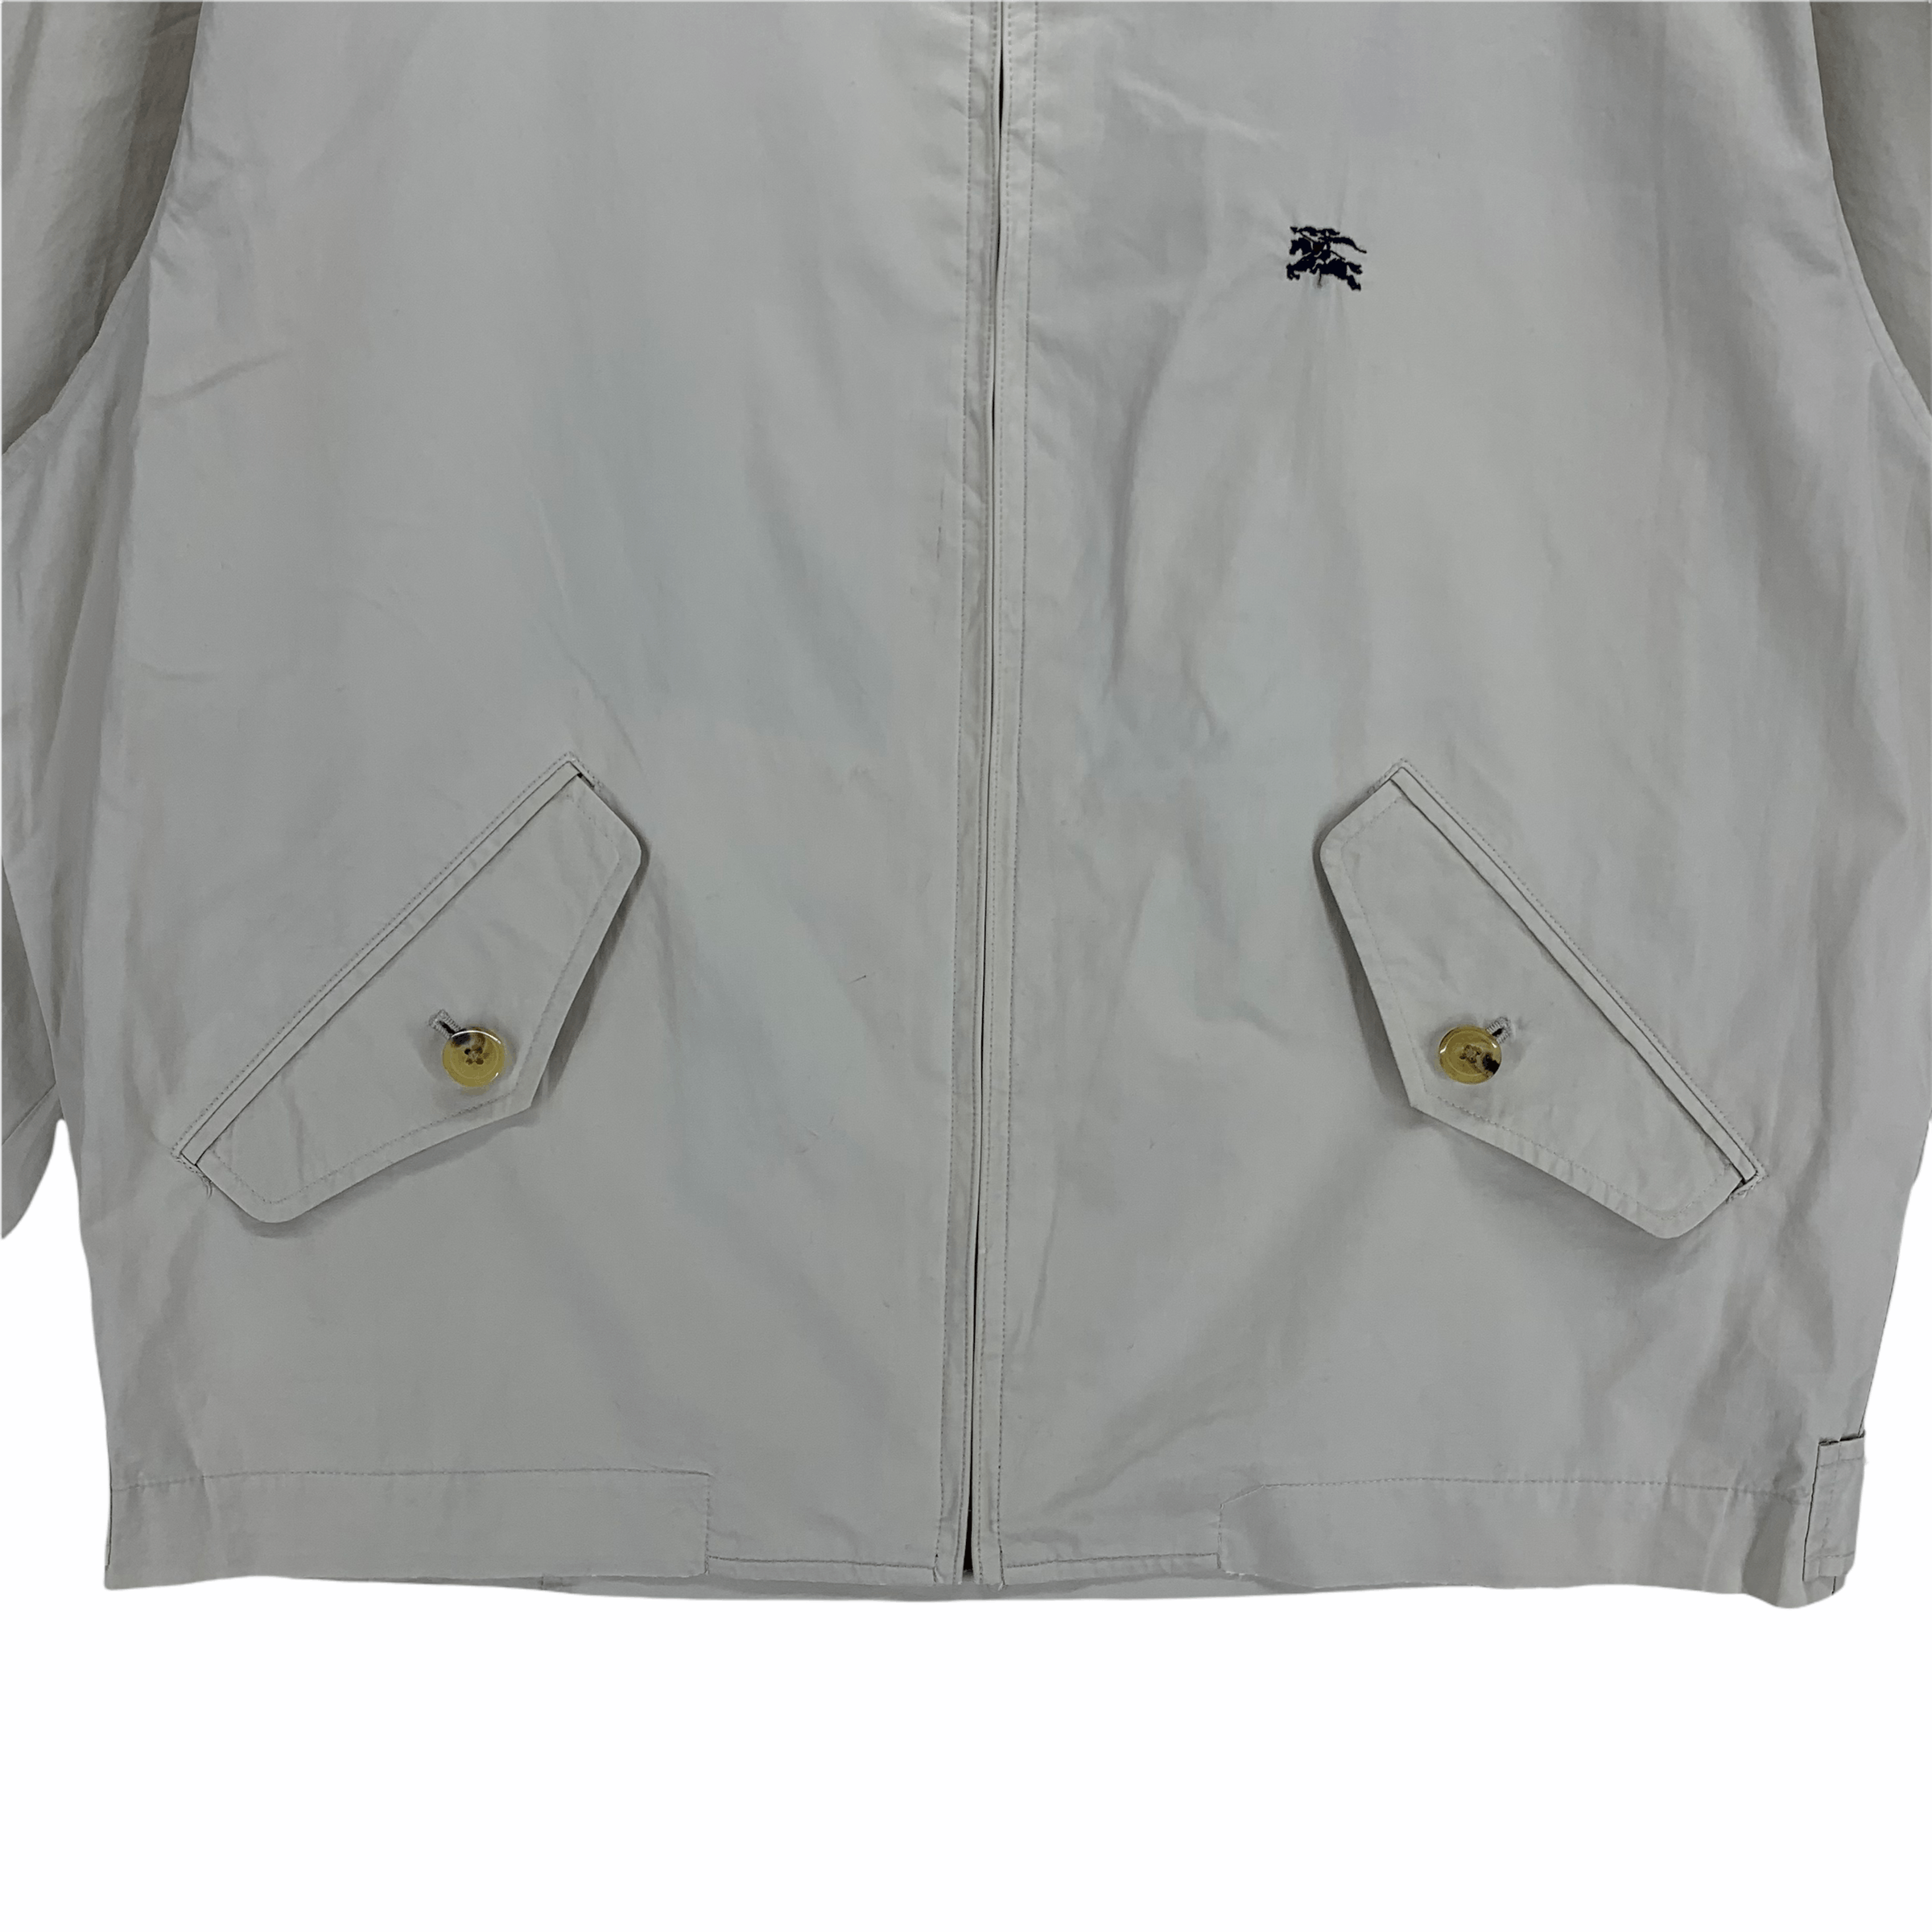 Burberry London Casual Jacket #3280-117 - 5